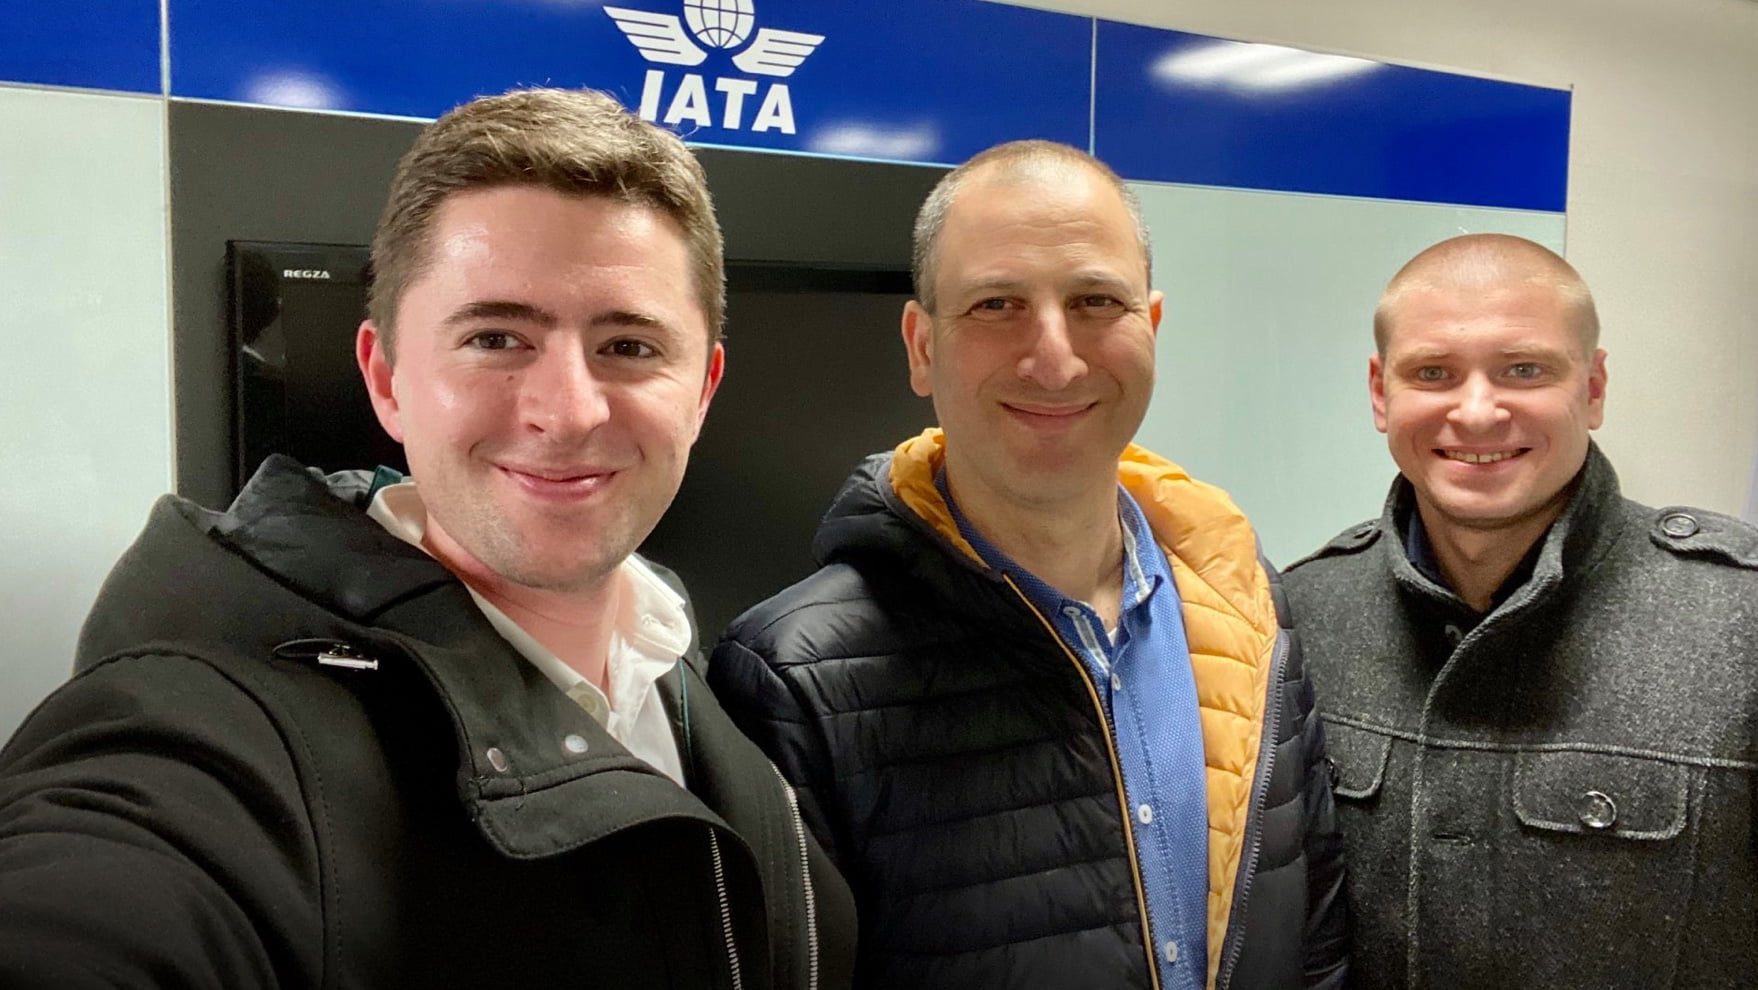 Sigma Software team and IATA Product Owner